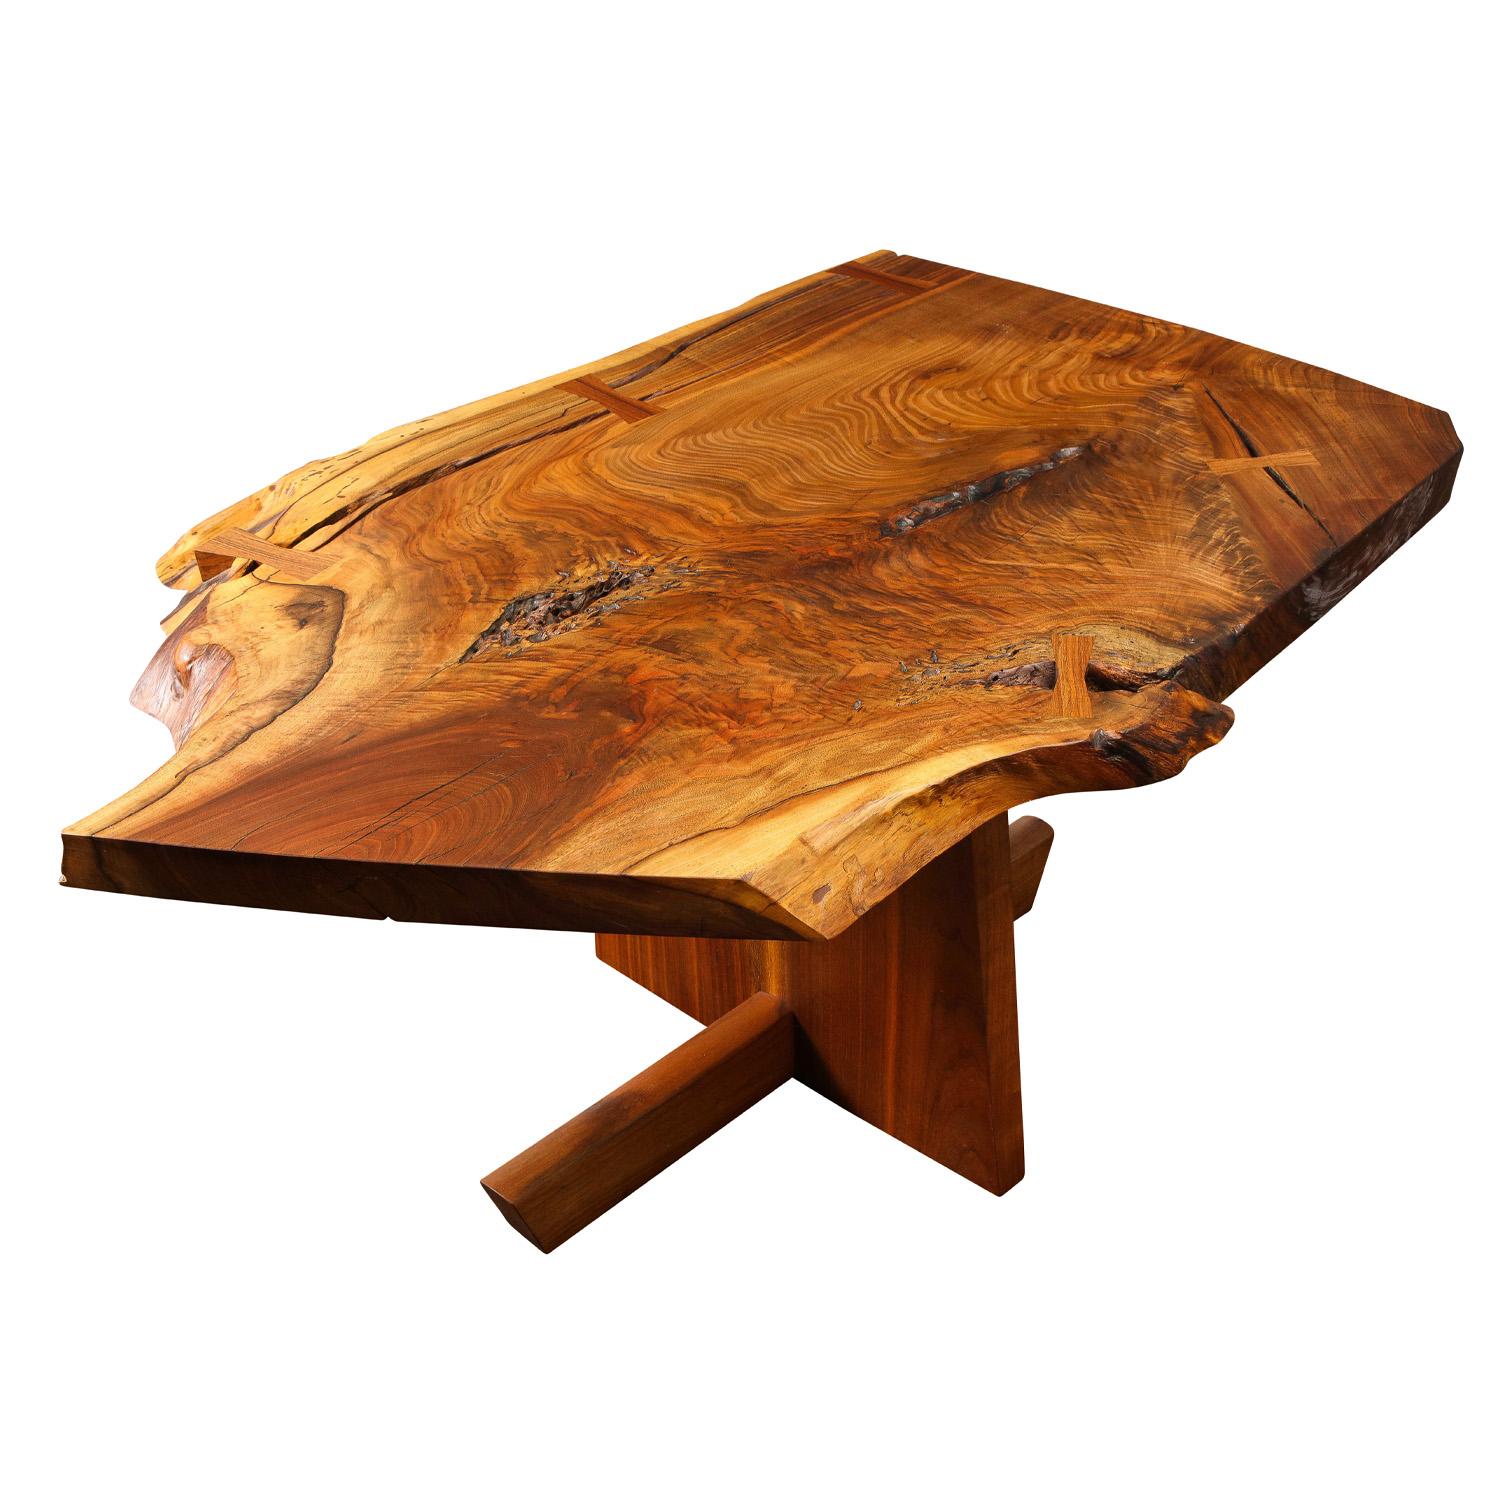 Hand-Crafted Mira Nakashima Stunning Free Edge Table in Black Walnut 2007 'Signed and Dated'